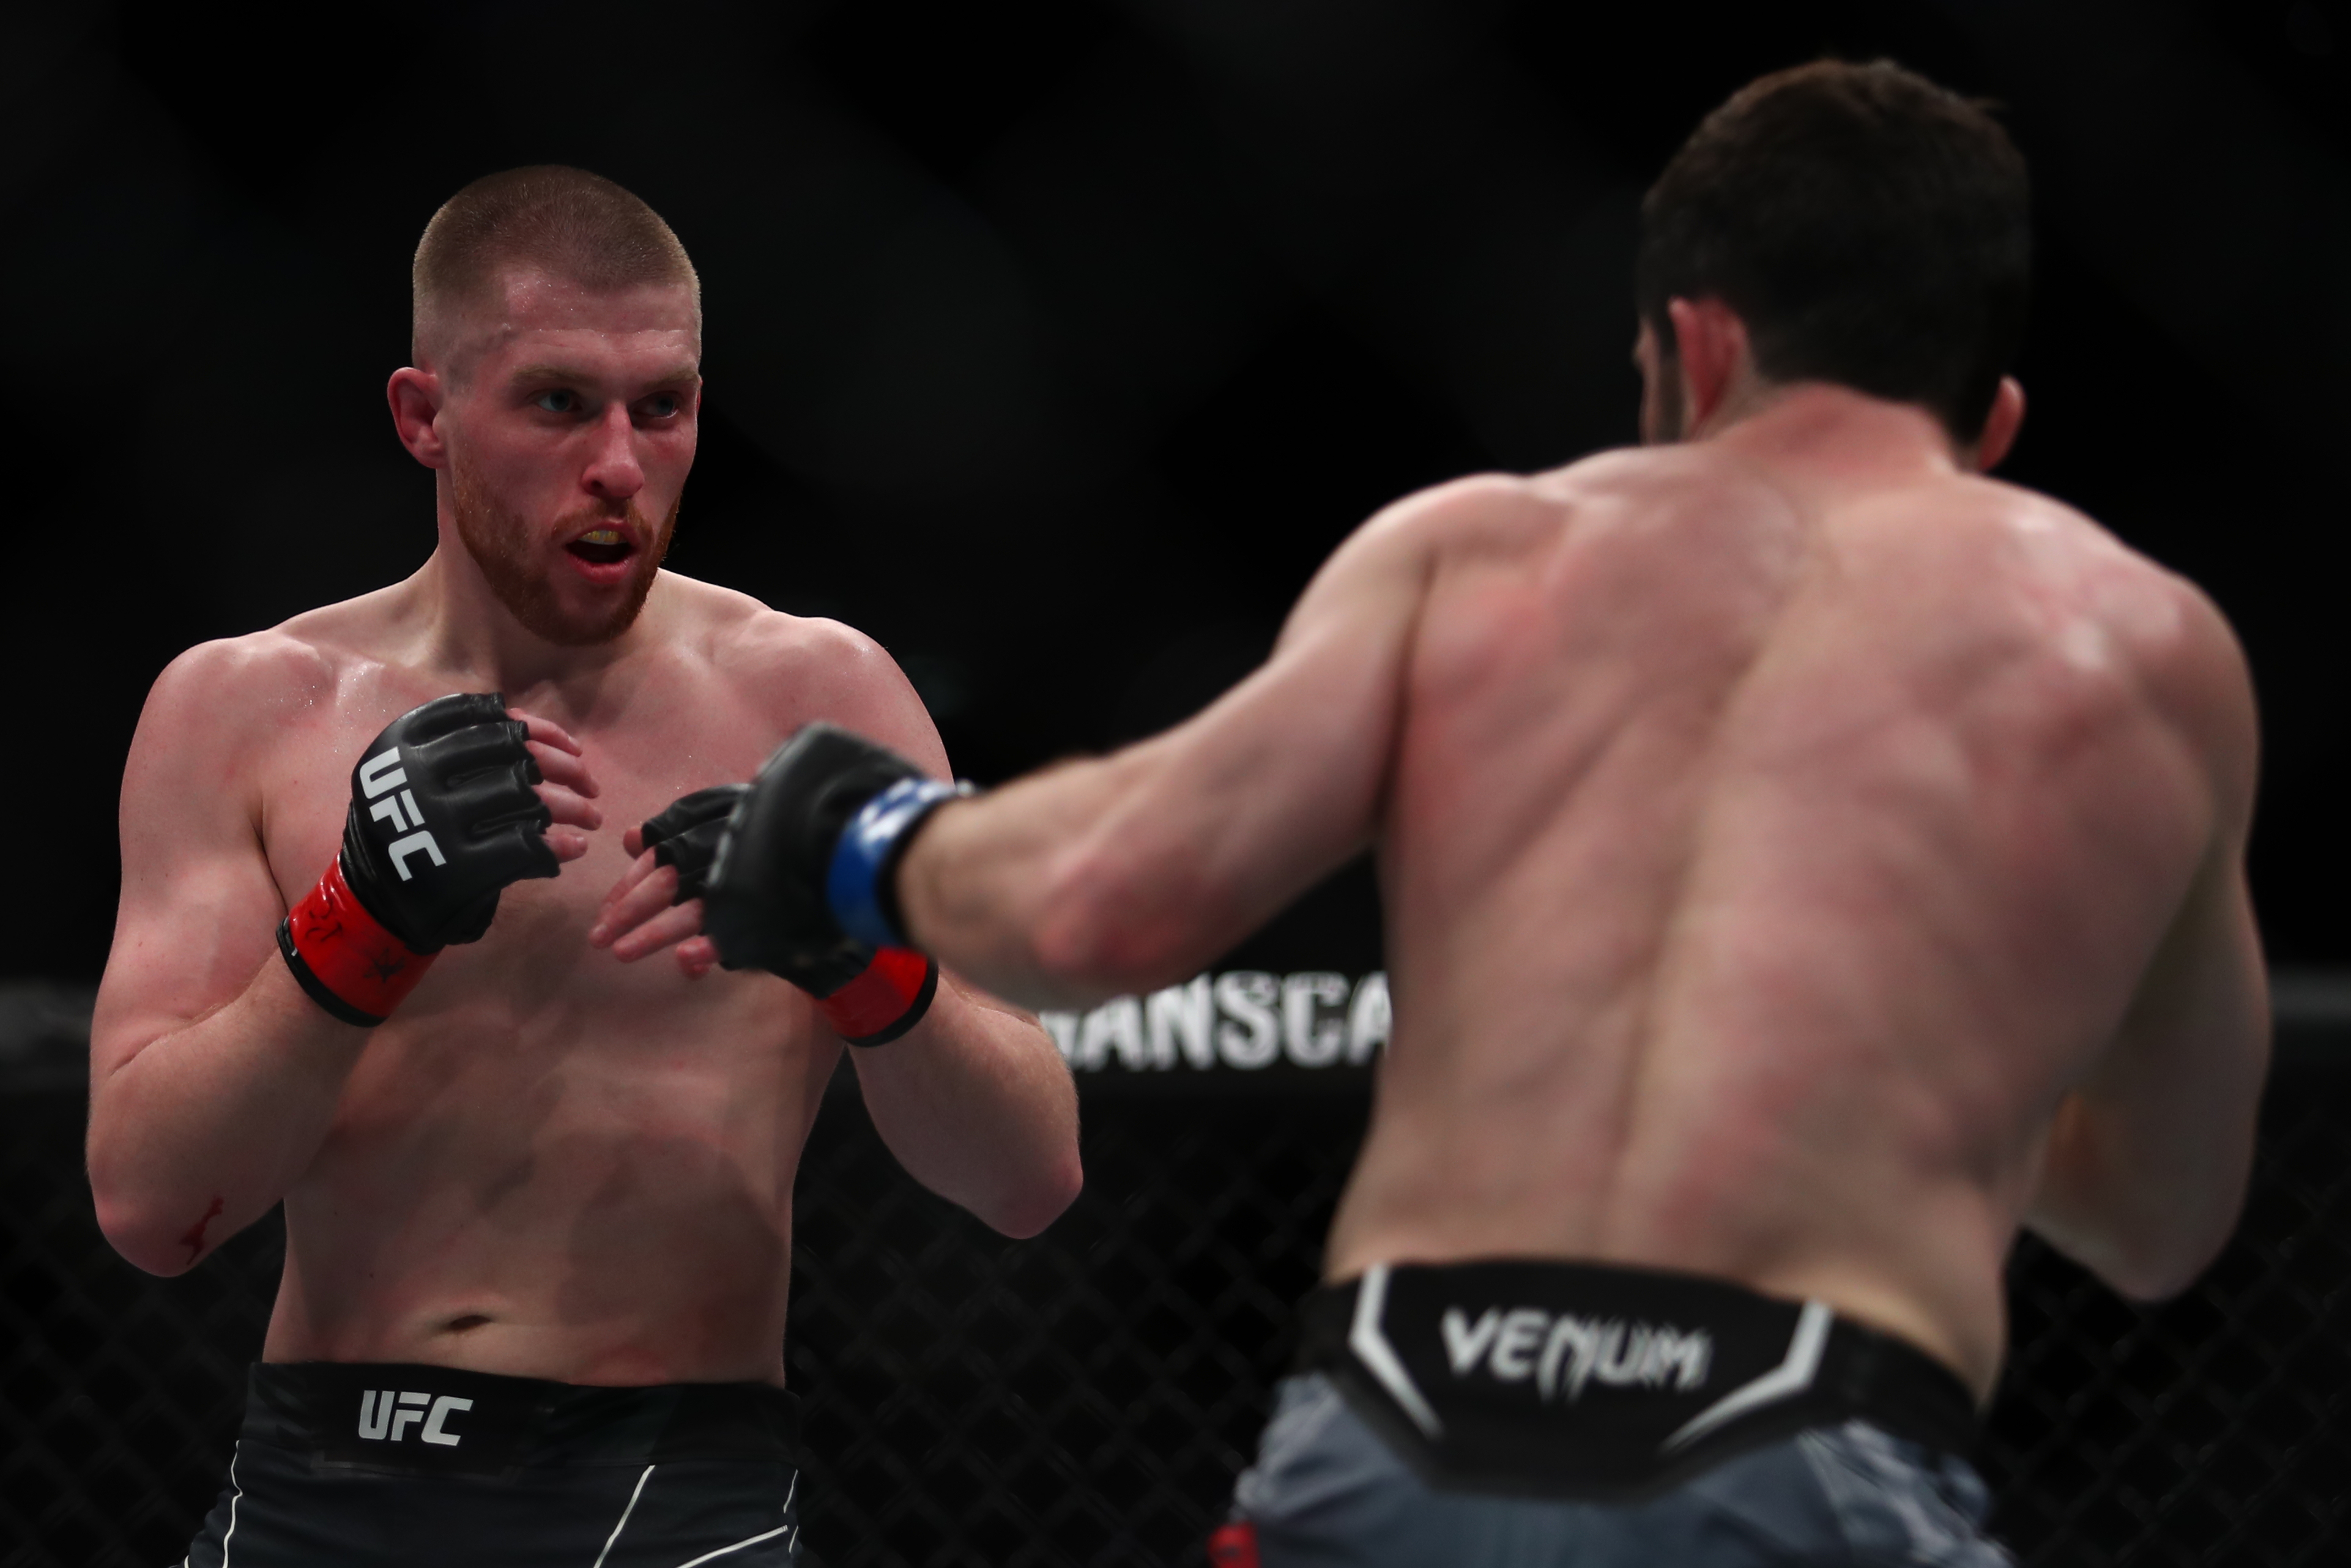 Jack Shore in action against Timur Valiev during UFC Fight Night 204 at the O2 Arena, Greenwich on Saturday 19th March 2022.